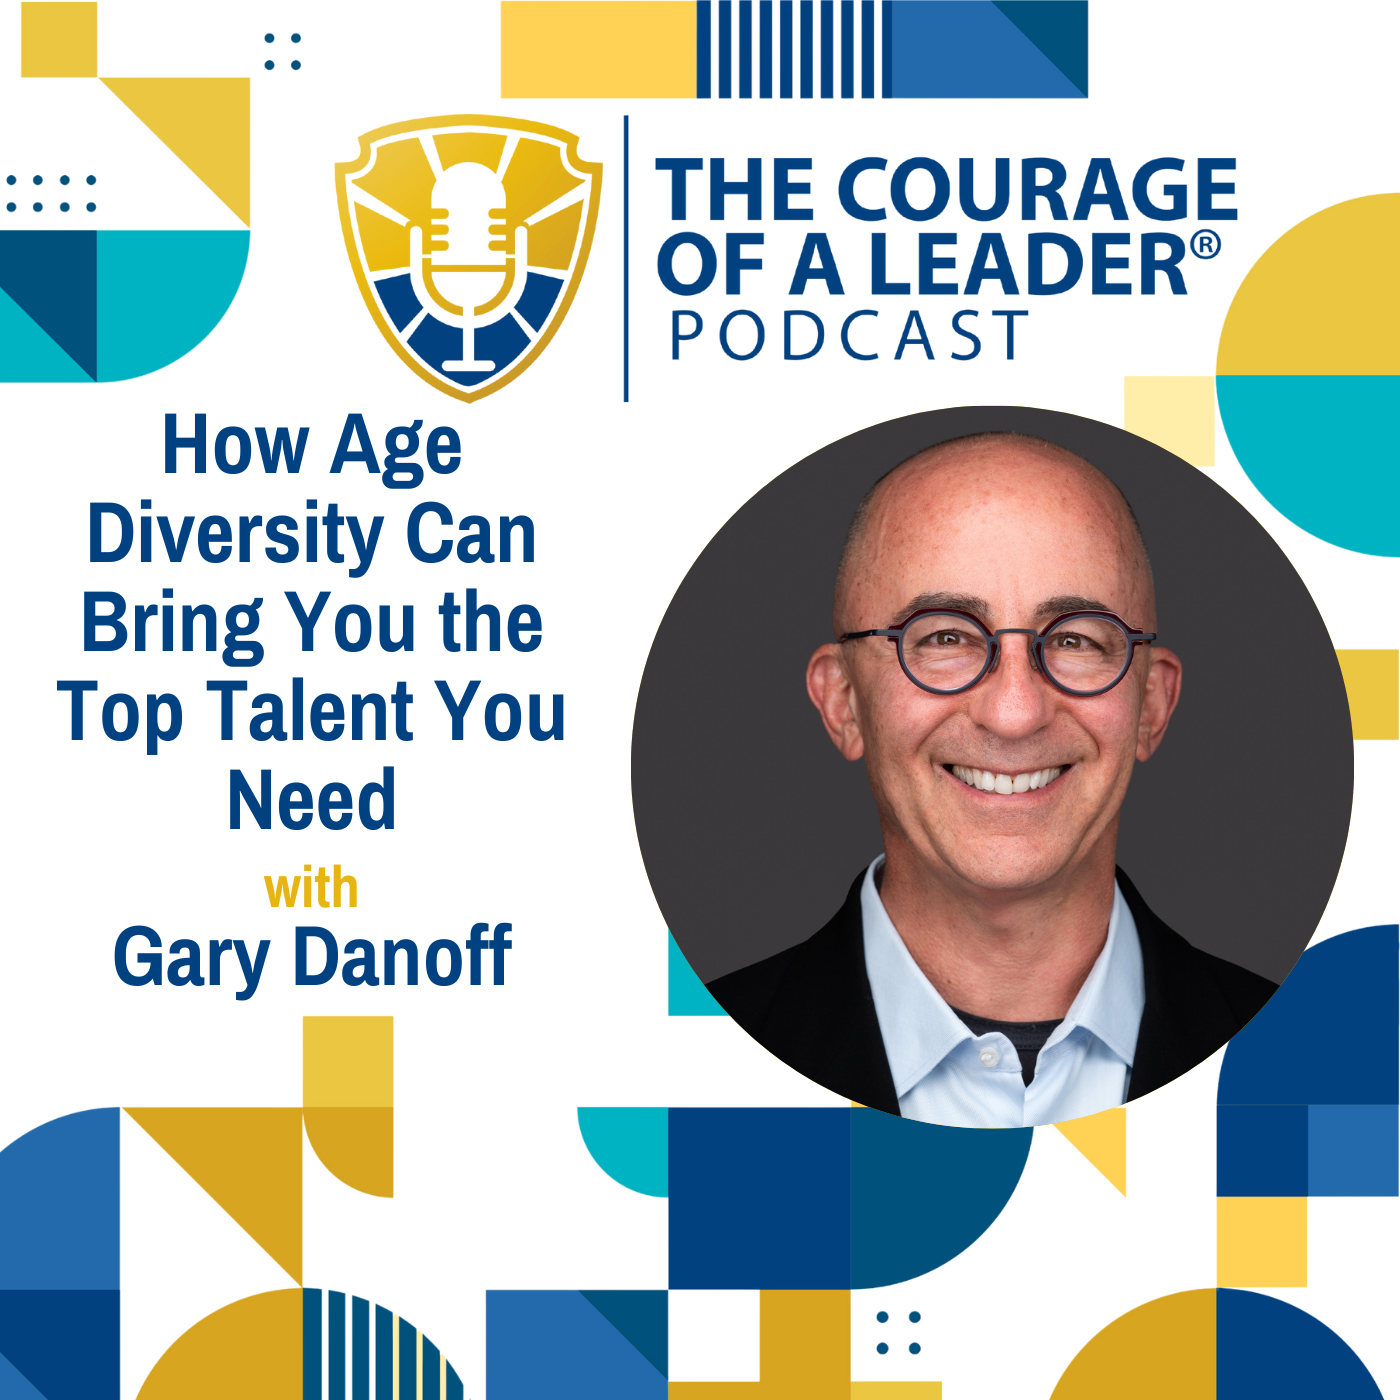 How Age Diversity Can Bring You the Top Talent You Need with Gary Danoff